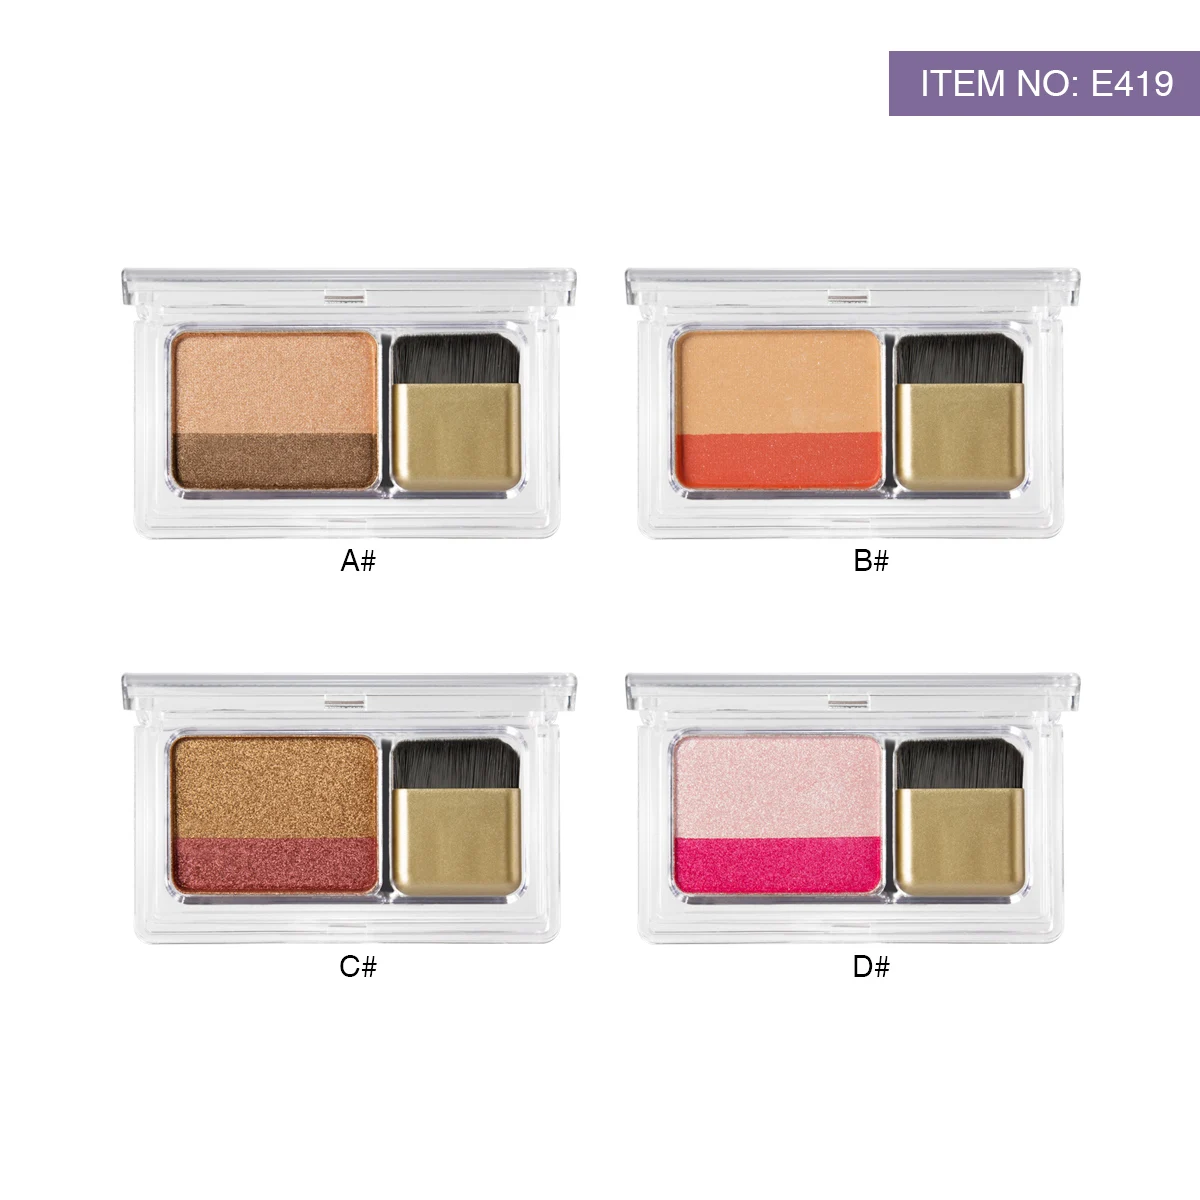 E419 Makeup Eyeshadow Palette Quick&Easy